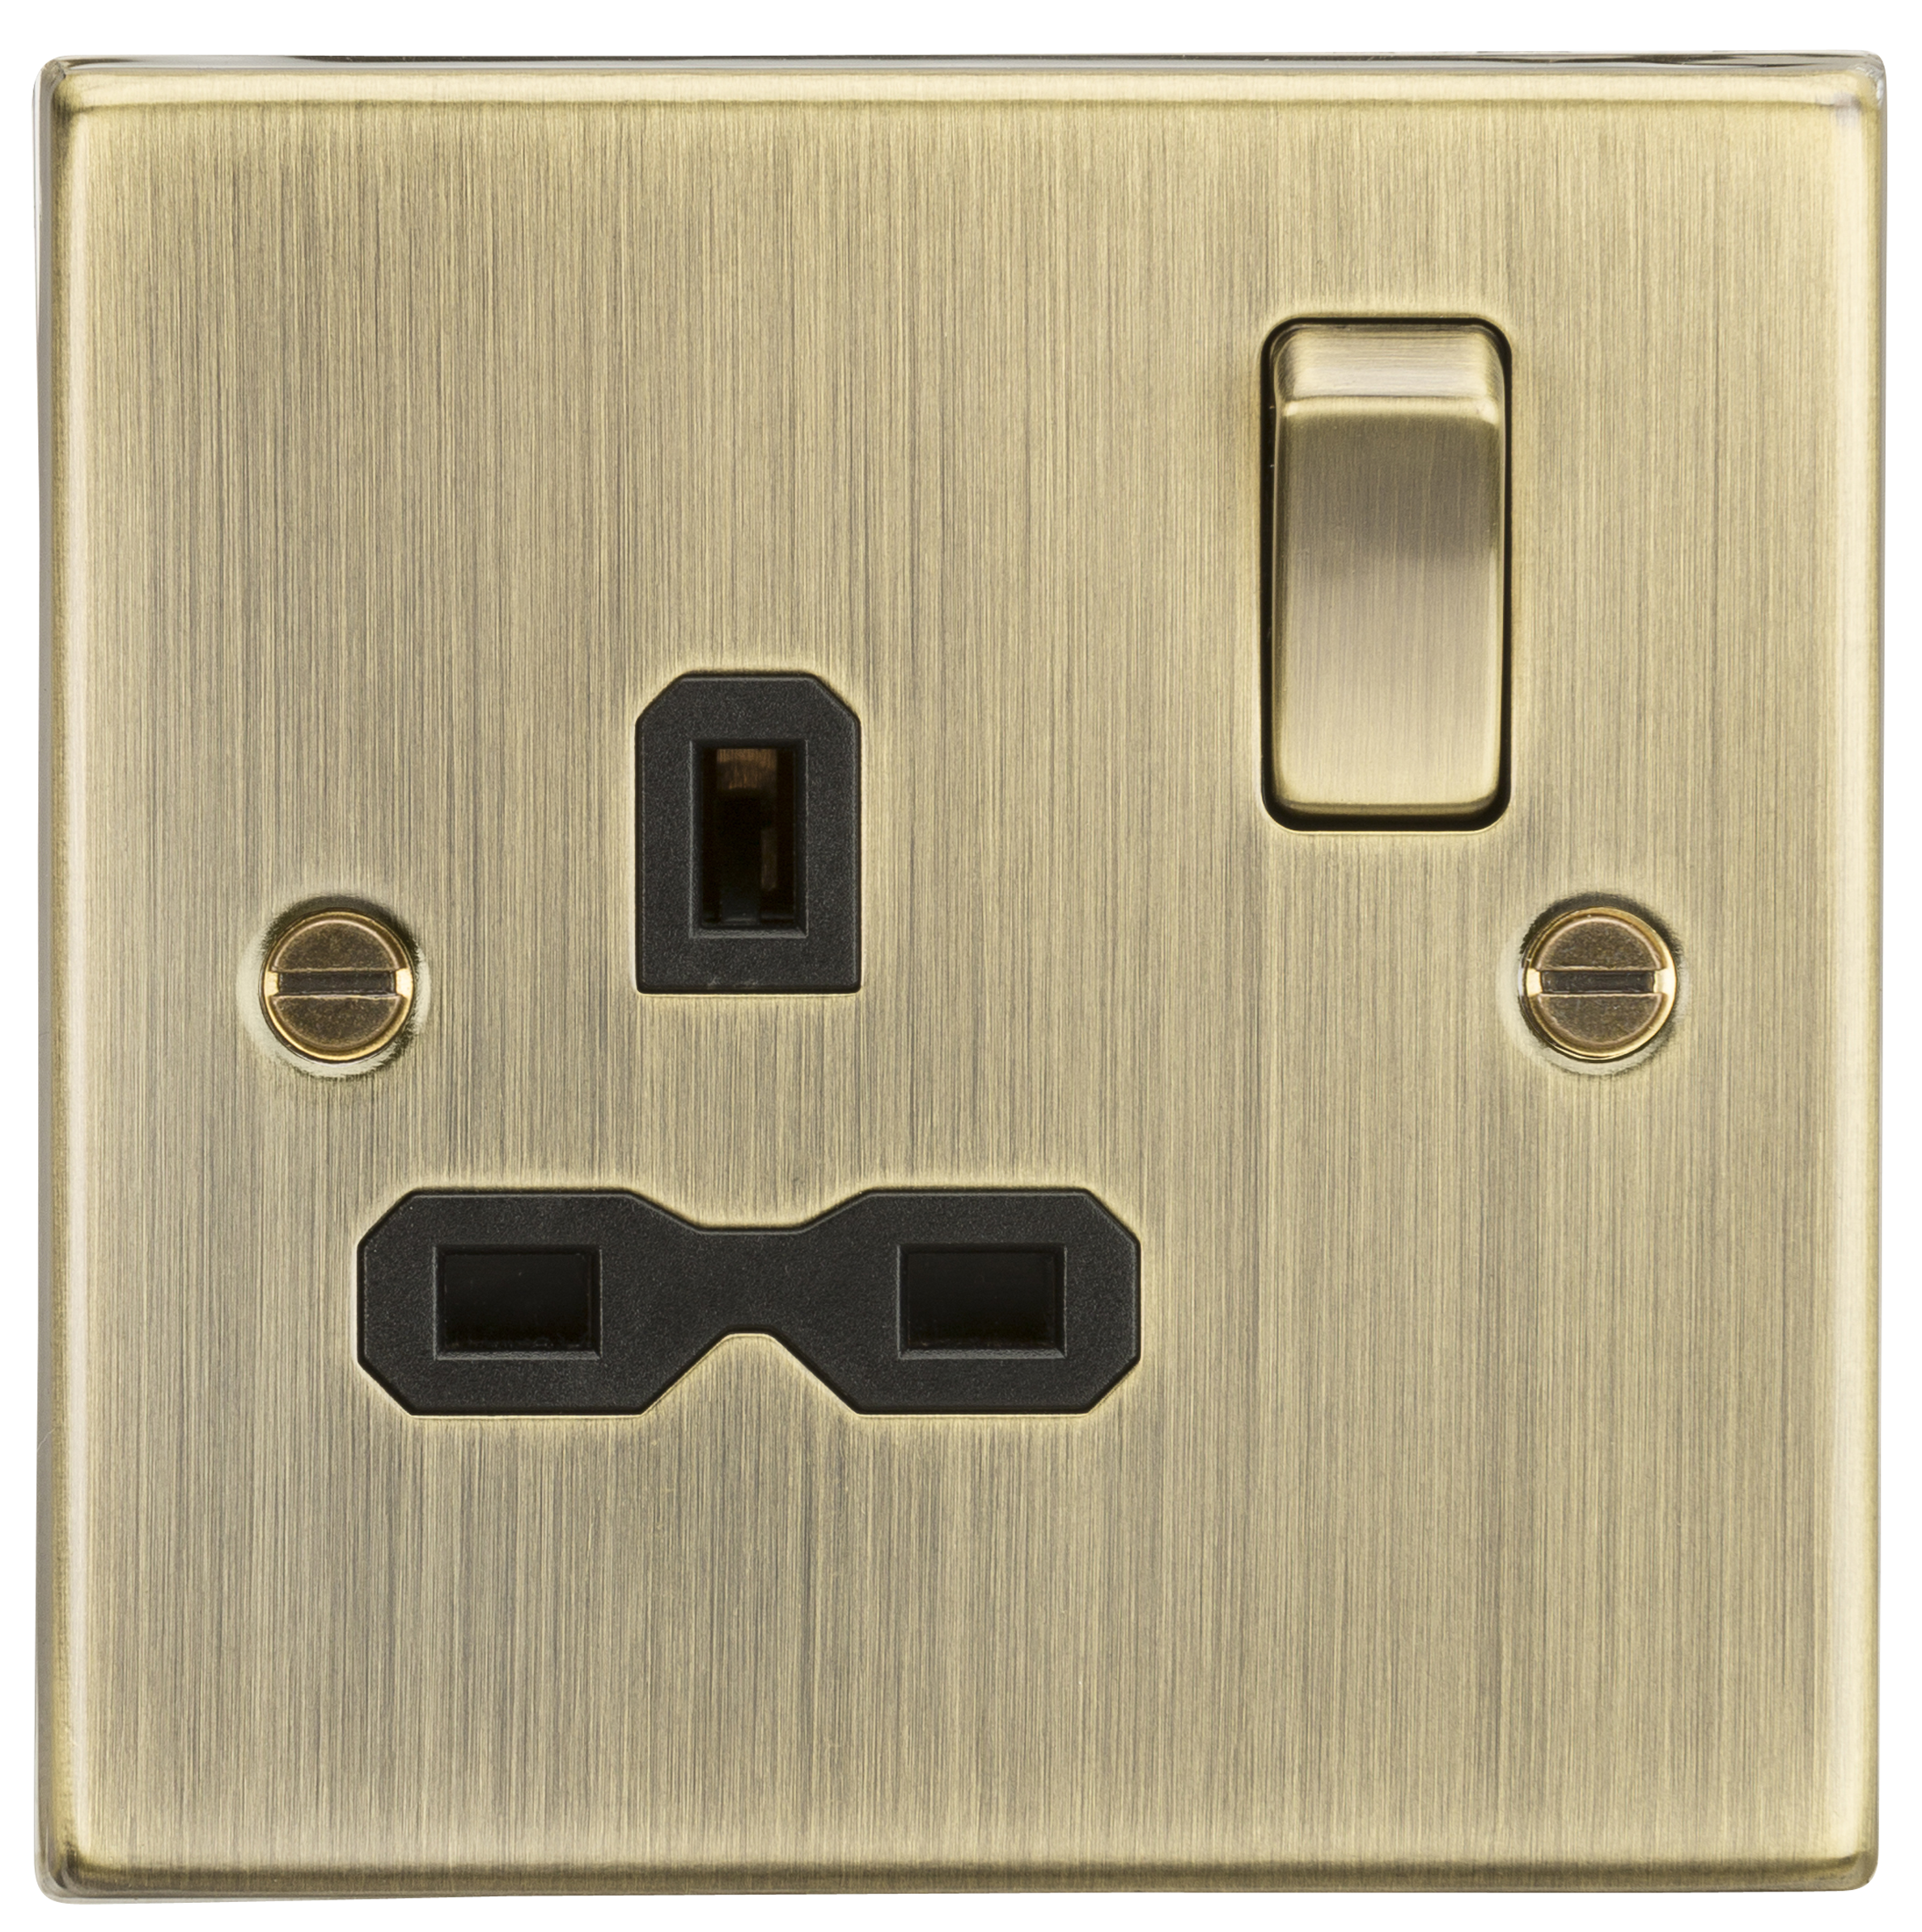 13A 1G DP Switched Socket With Black Insert - Square Edge Antique Brass - CS7AB 